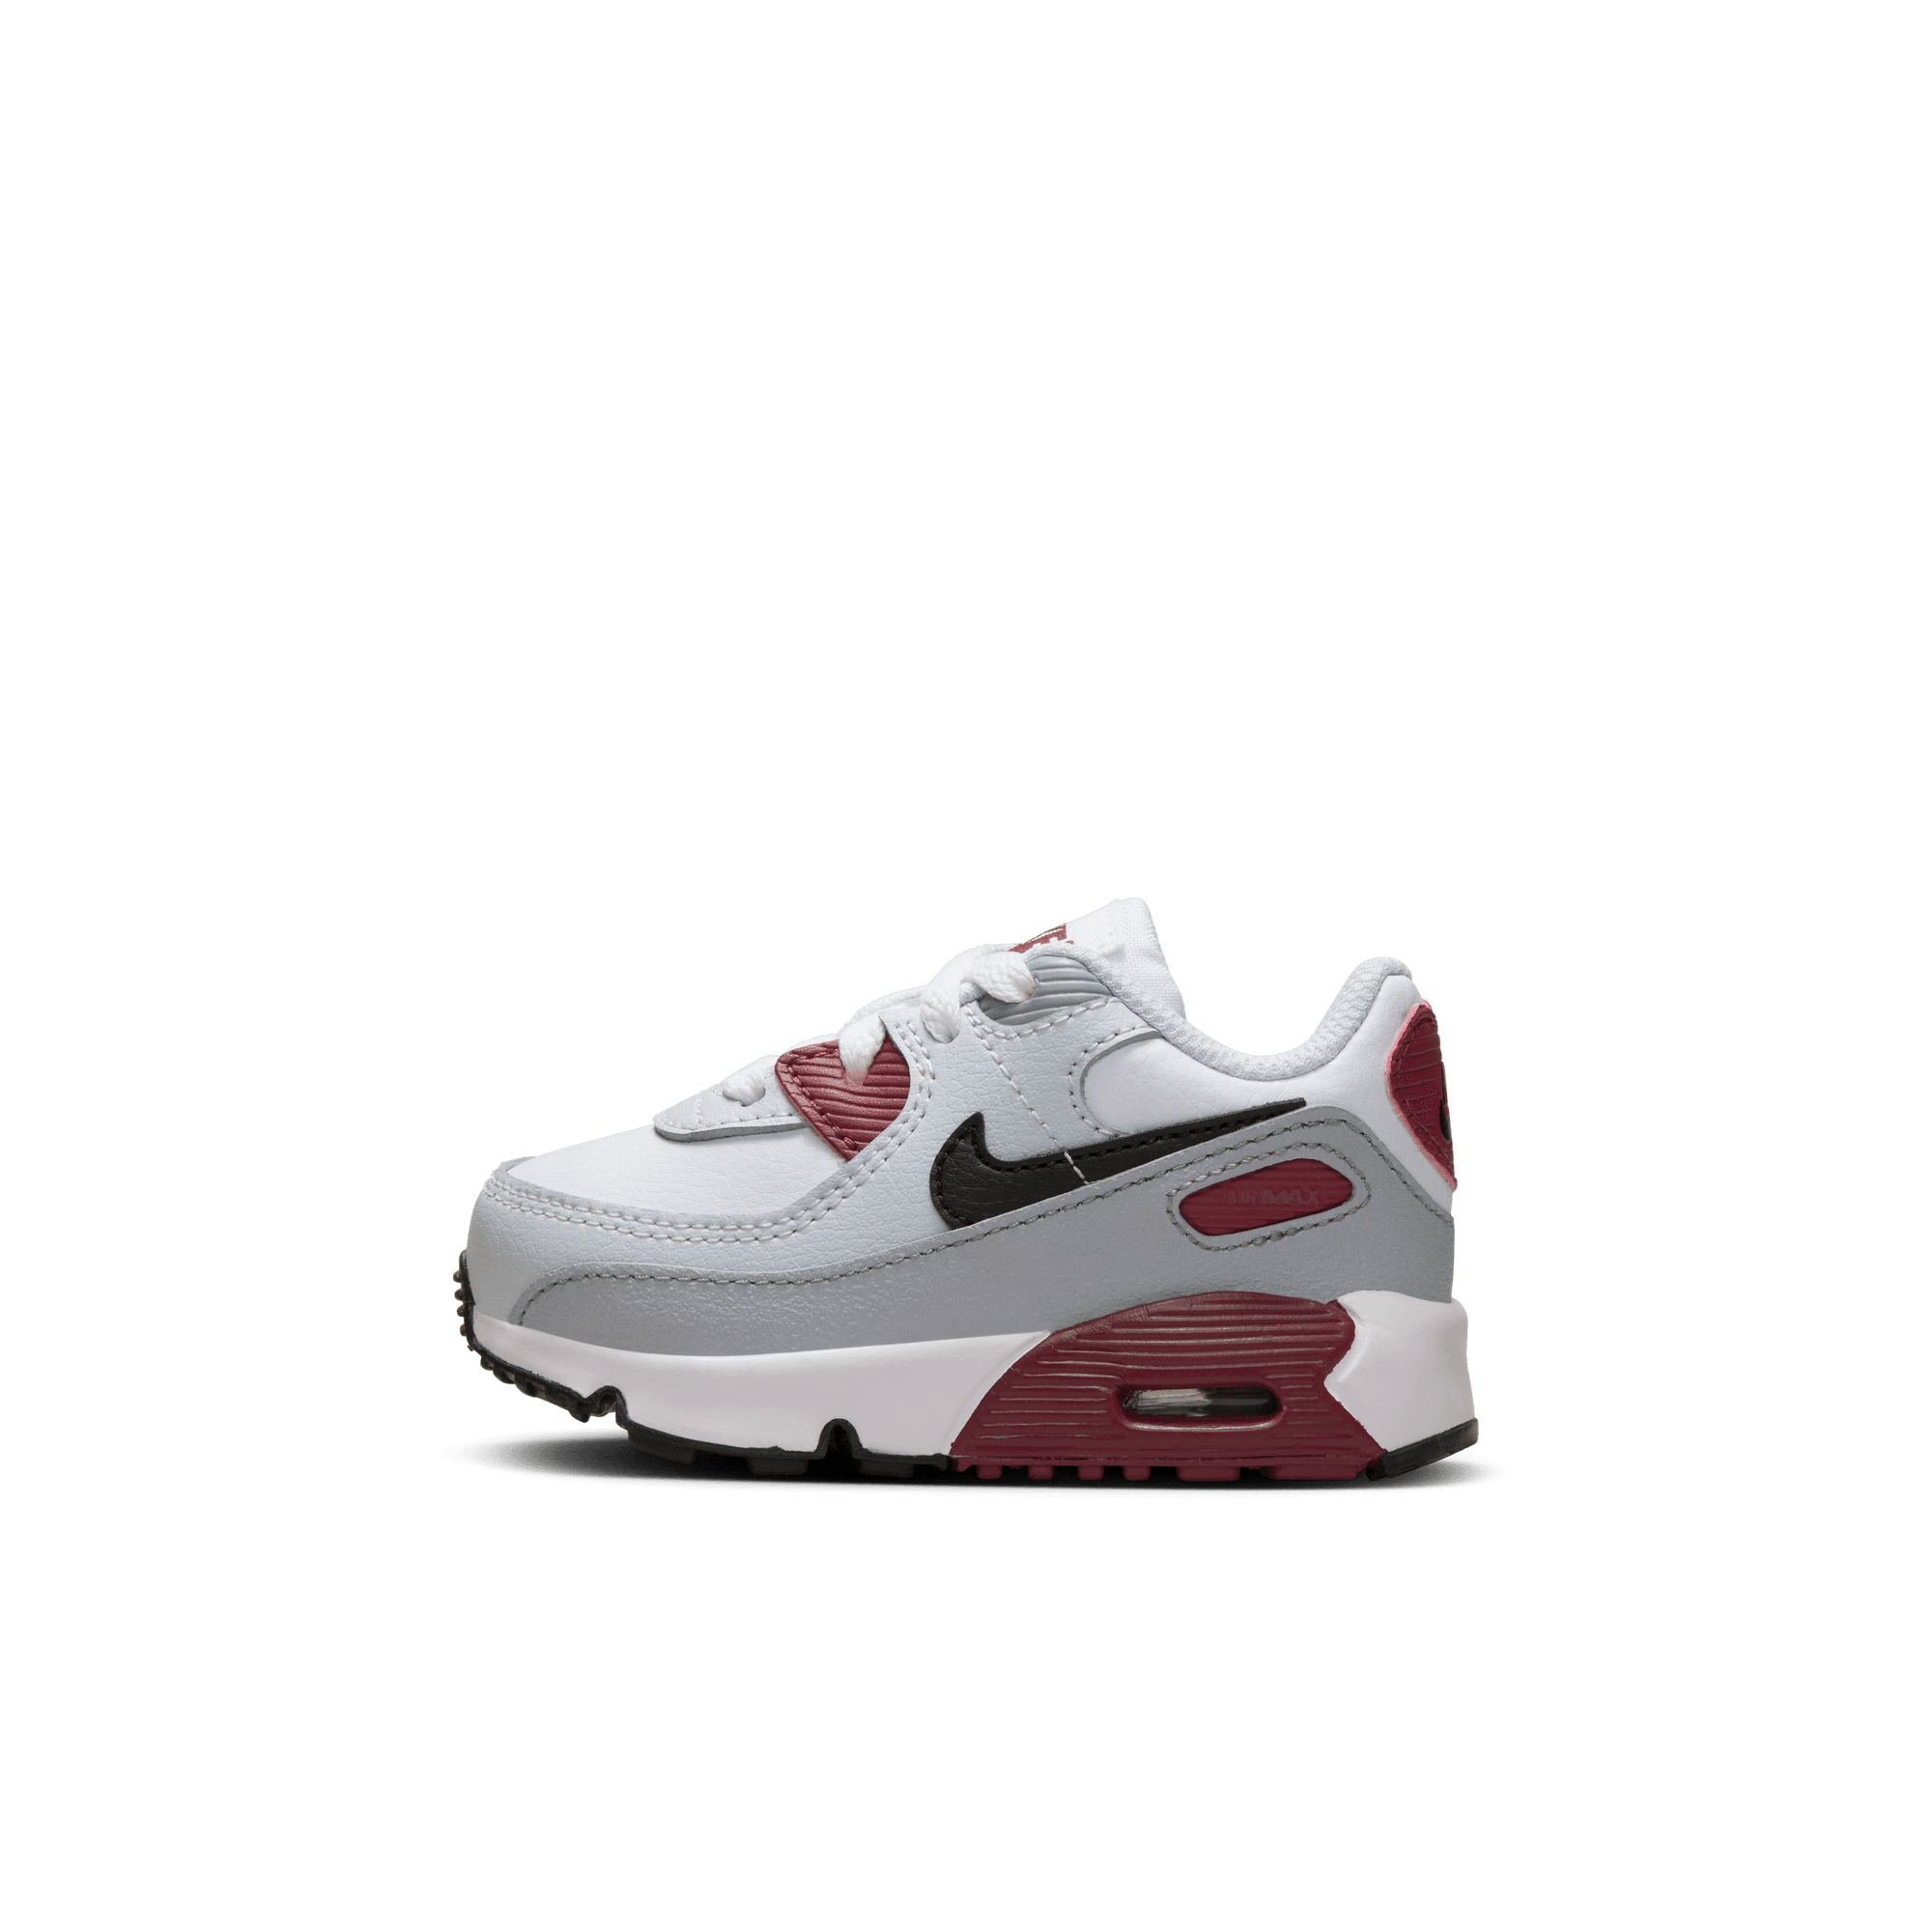 NIKE AIR MAX 90 LTR BABY/TODDLER SHOES